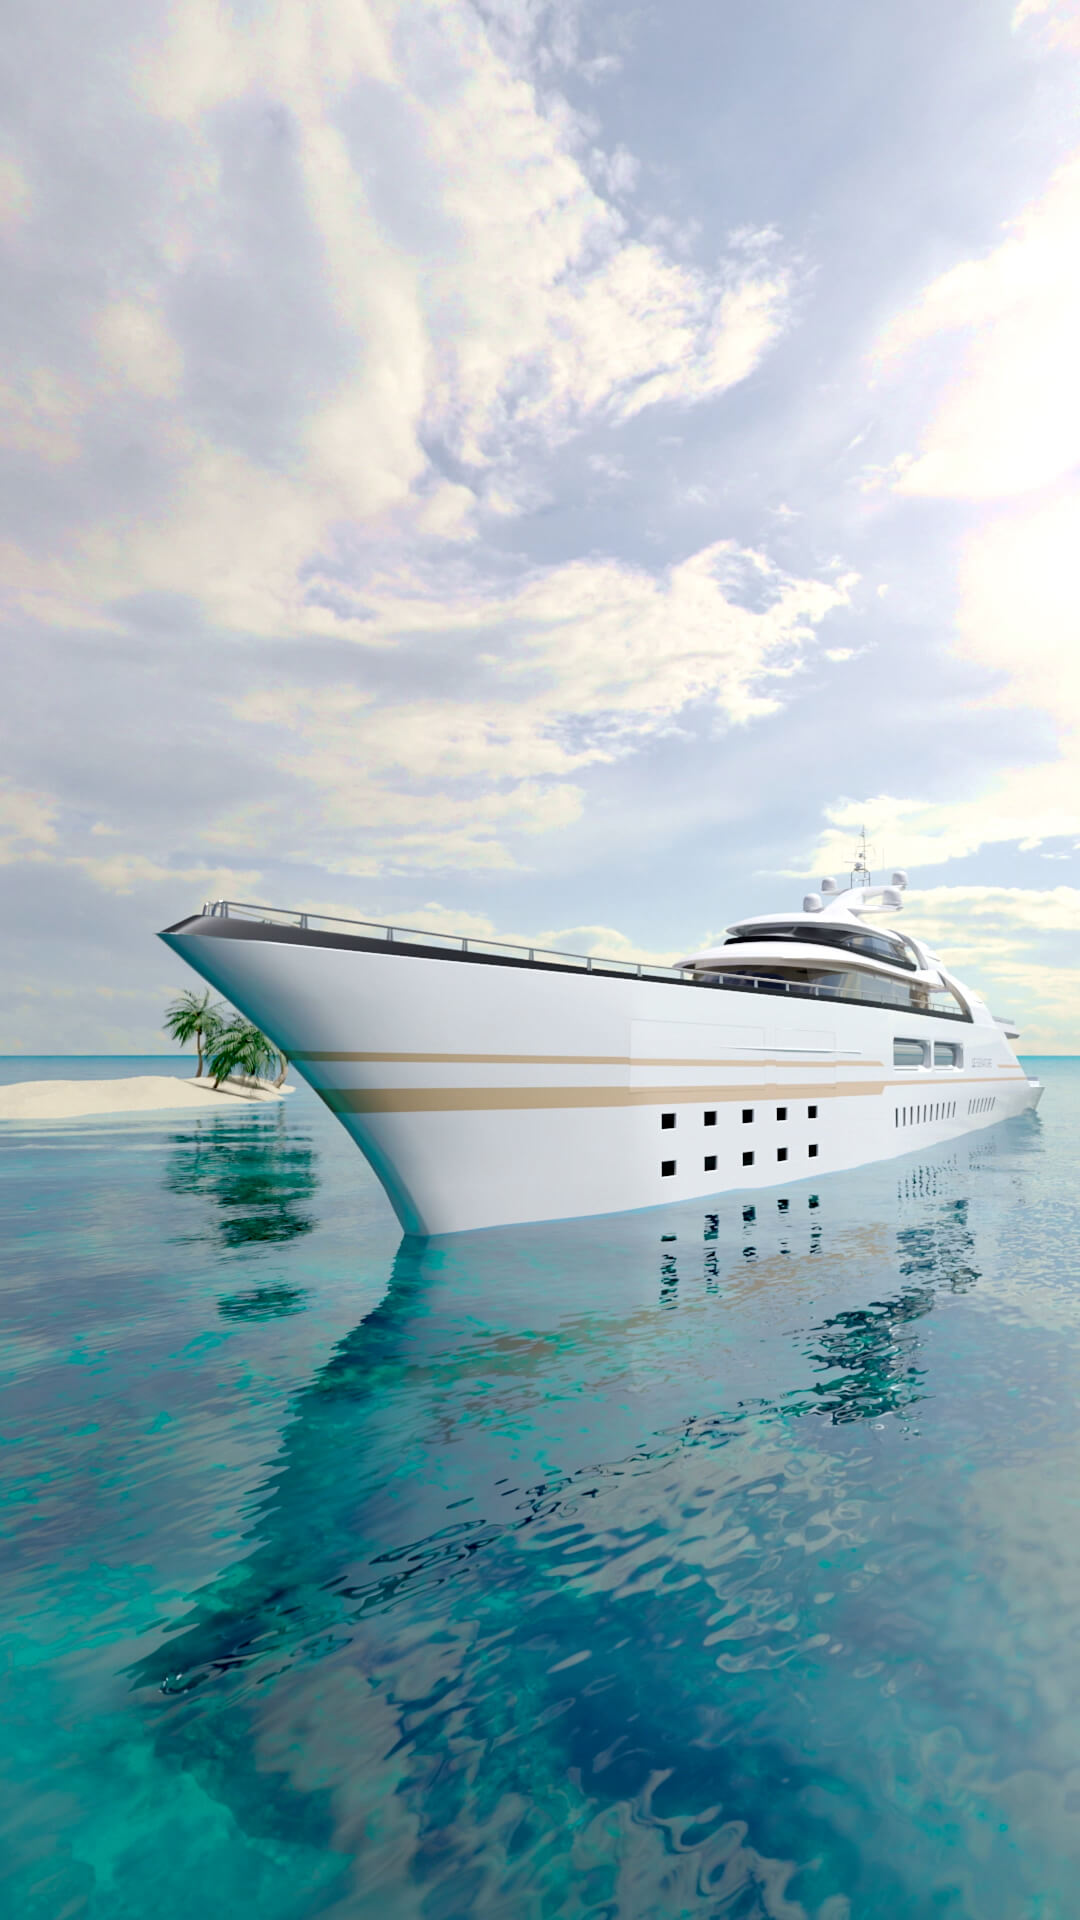 A 3D rendered yacht for a product marketing campaign